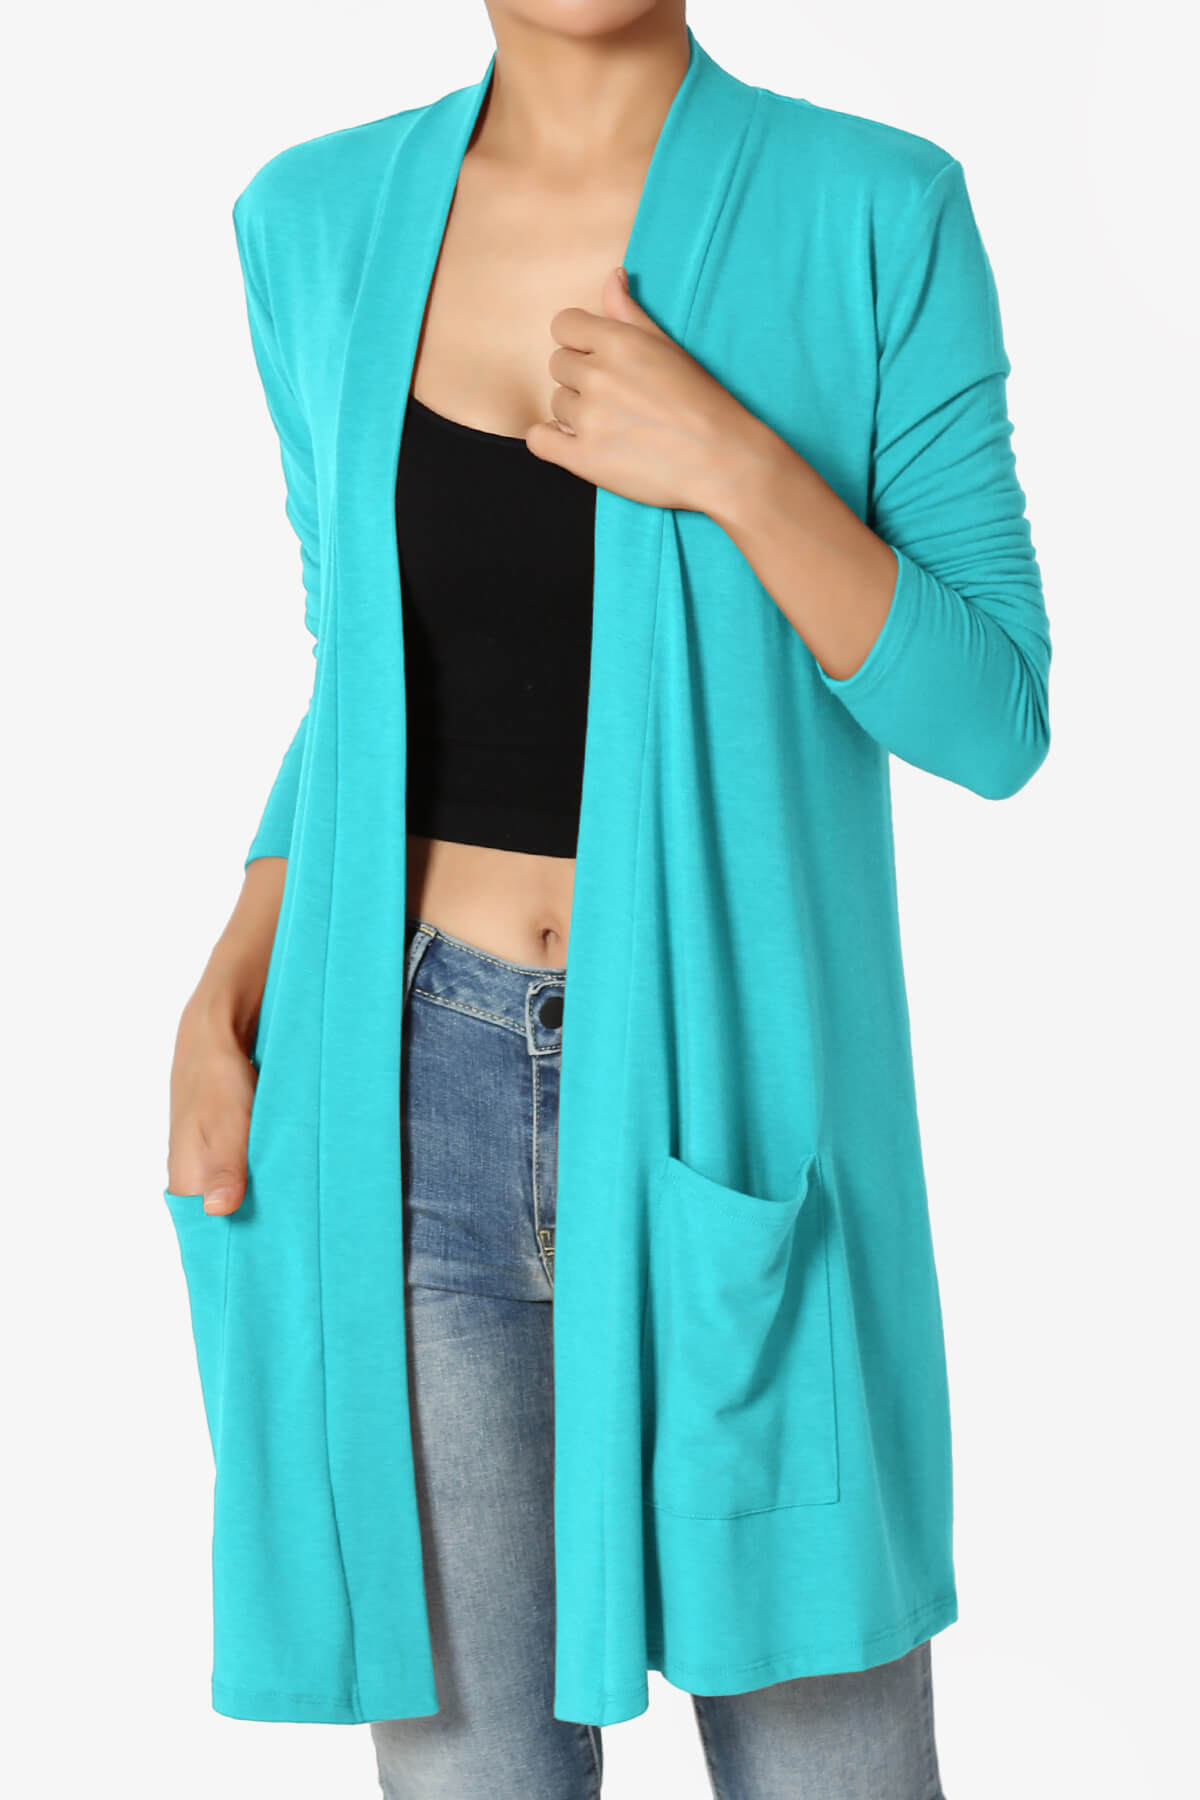 Daday Long Sleeve Pocket Open Front Cardigan ICE BLUE_1